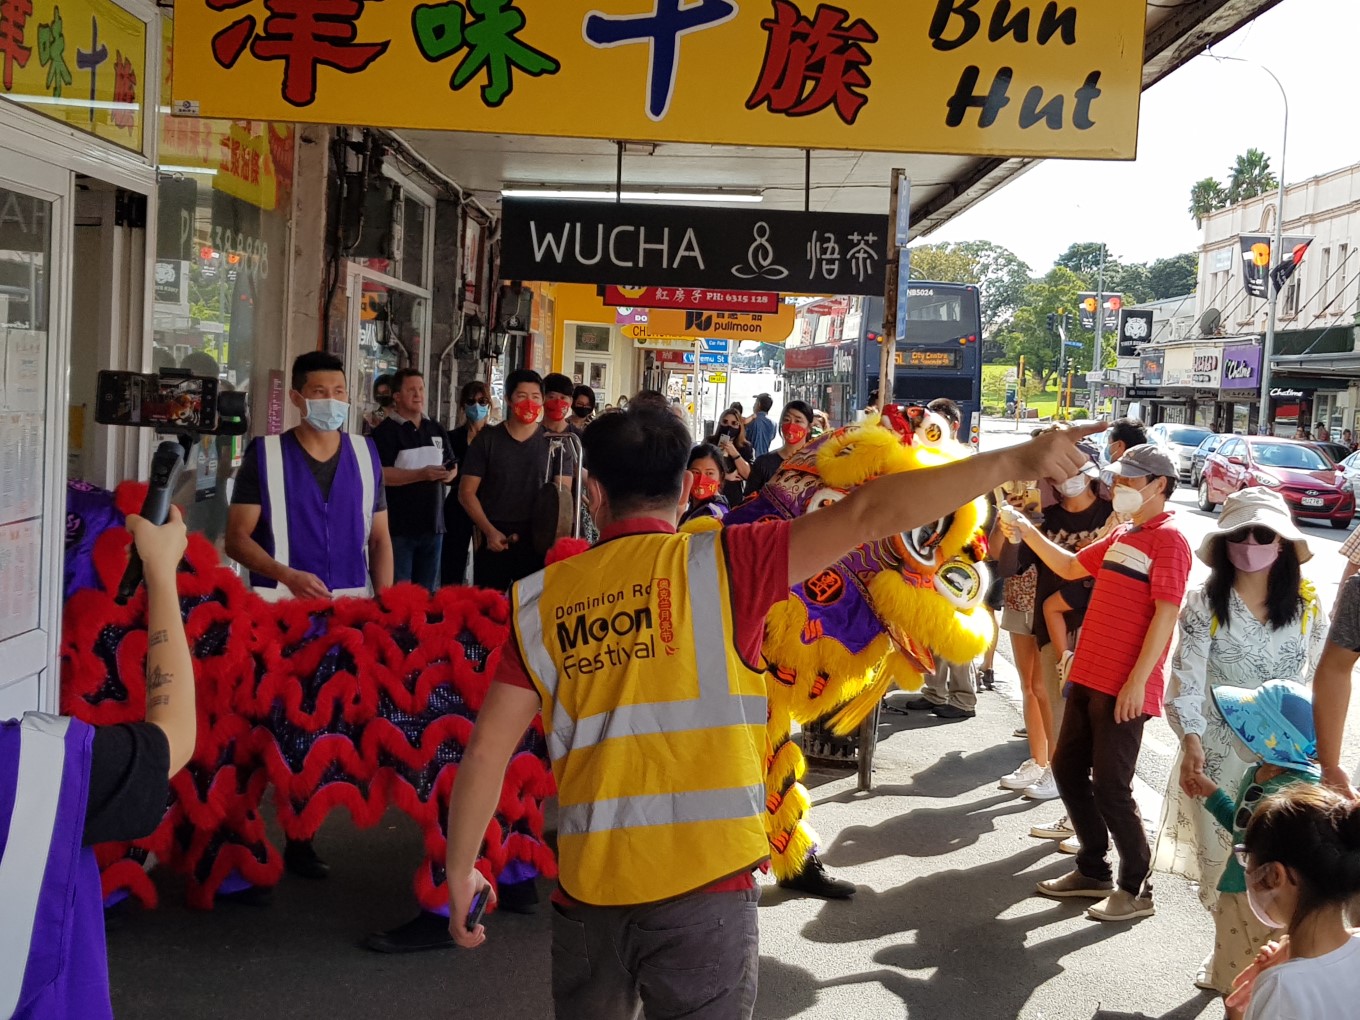 The Moon Festival returns to Dominion Road OurAuckland